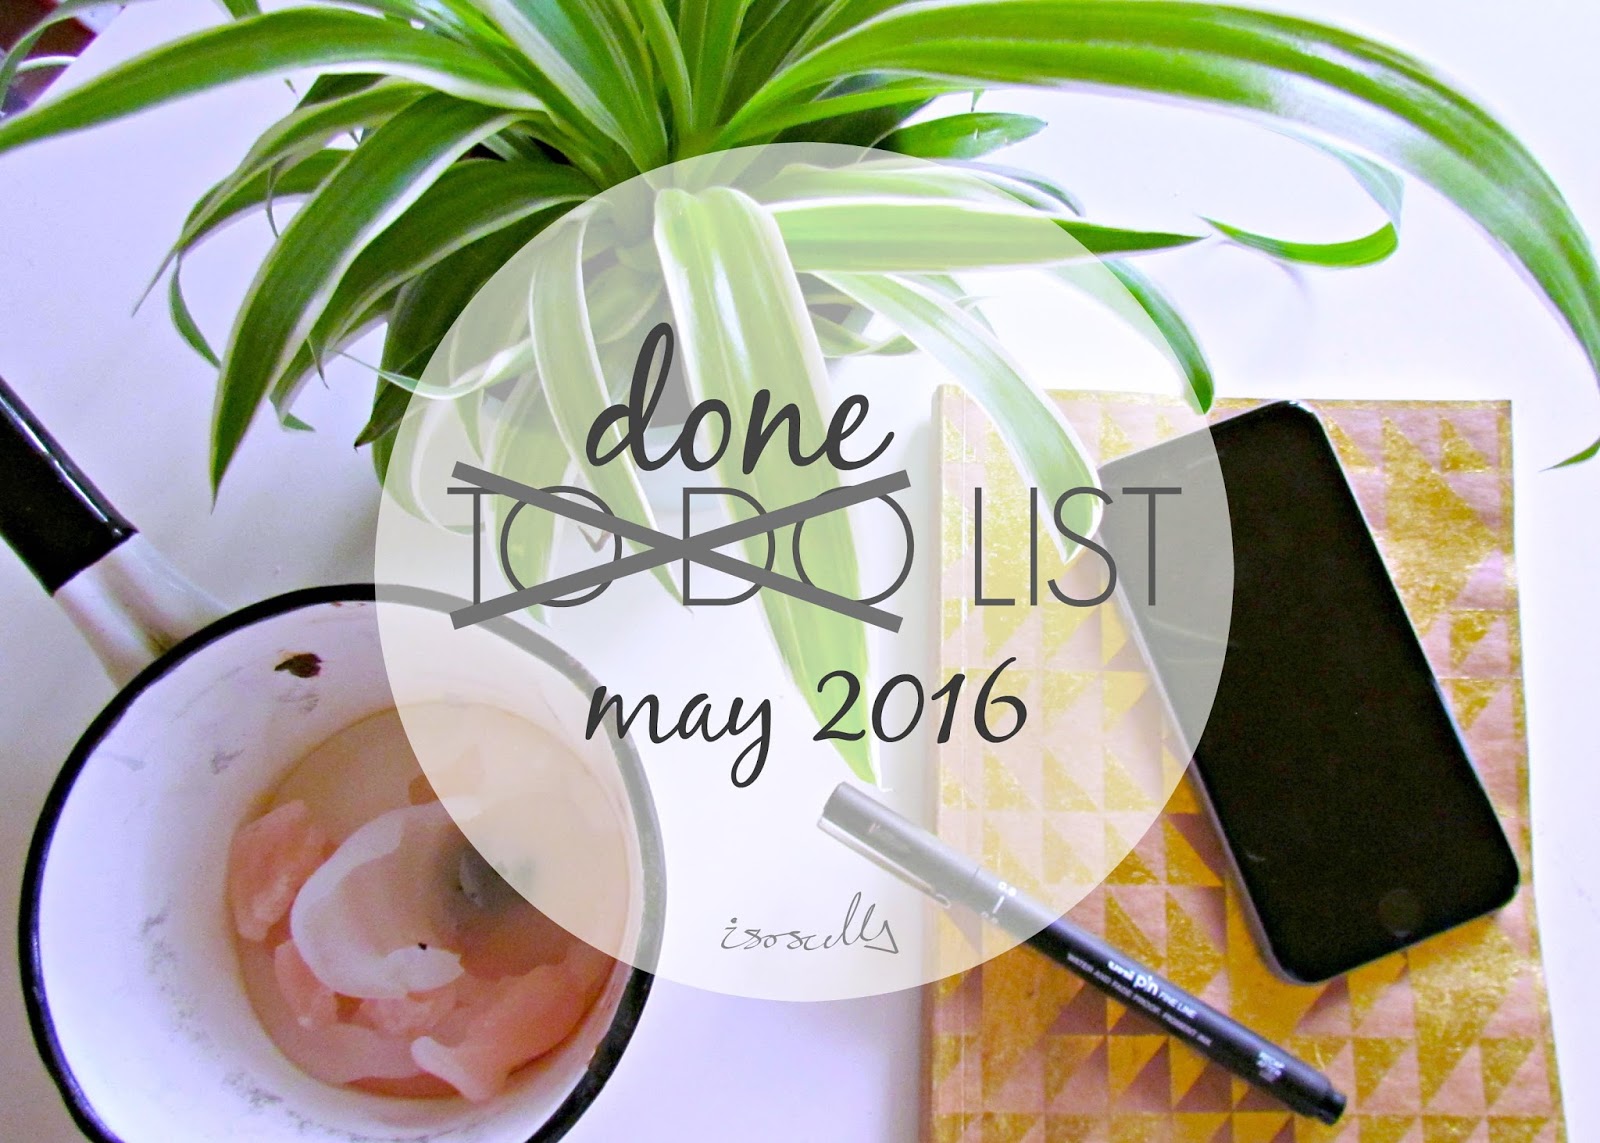 Done List May 2016 by Isoscella